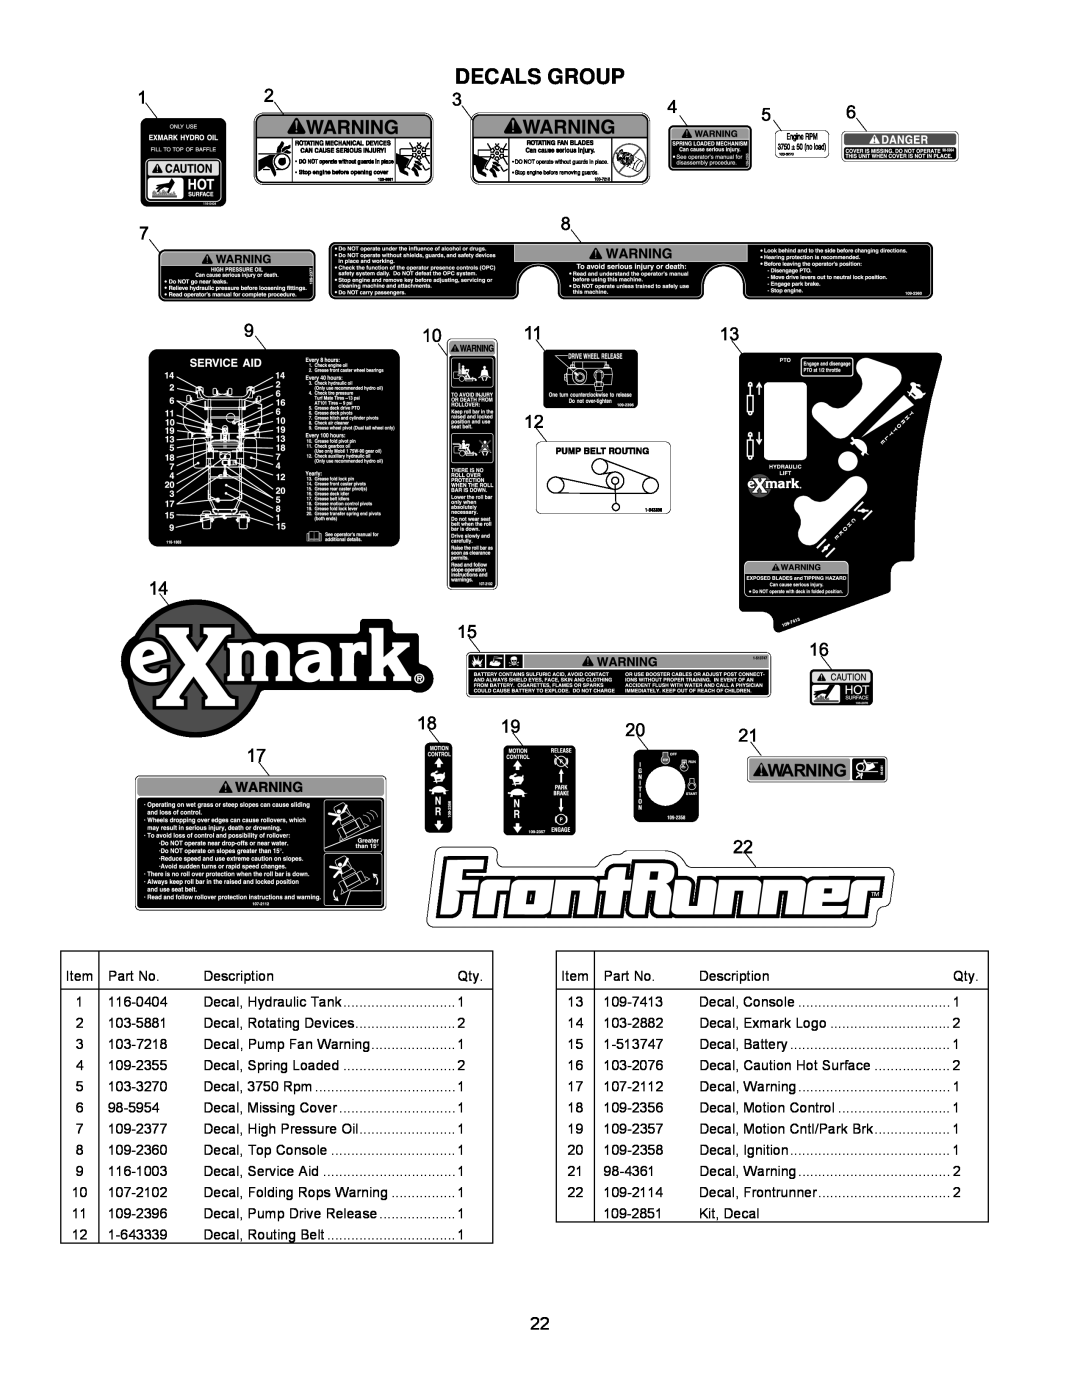 Exmark 4500-341 manual Decals Group 